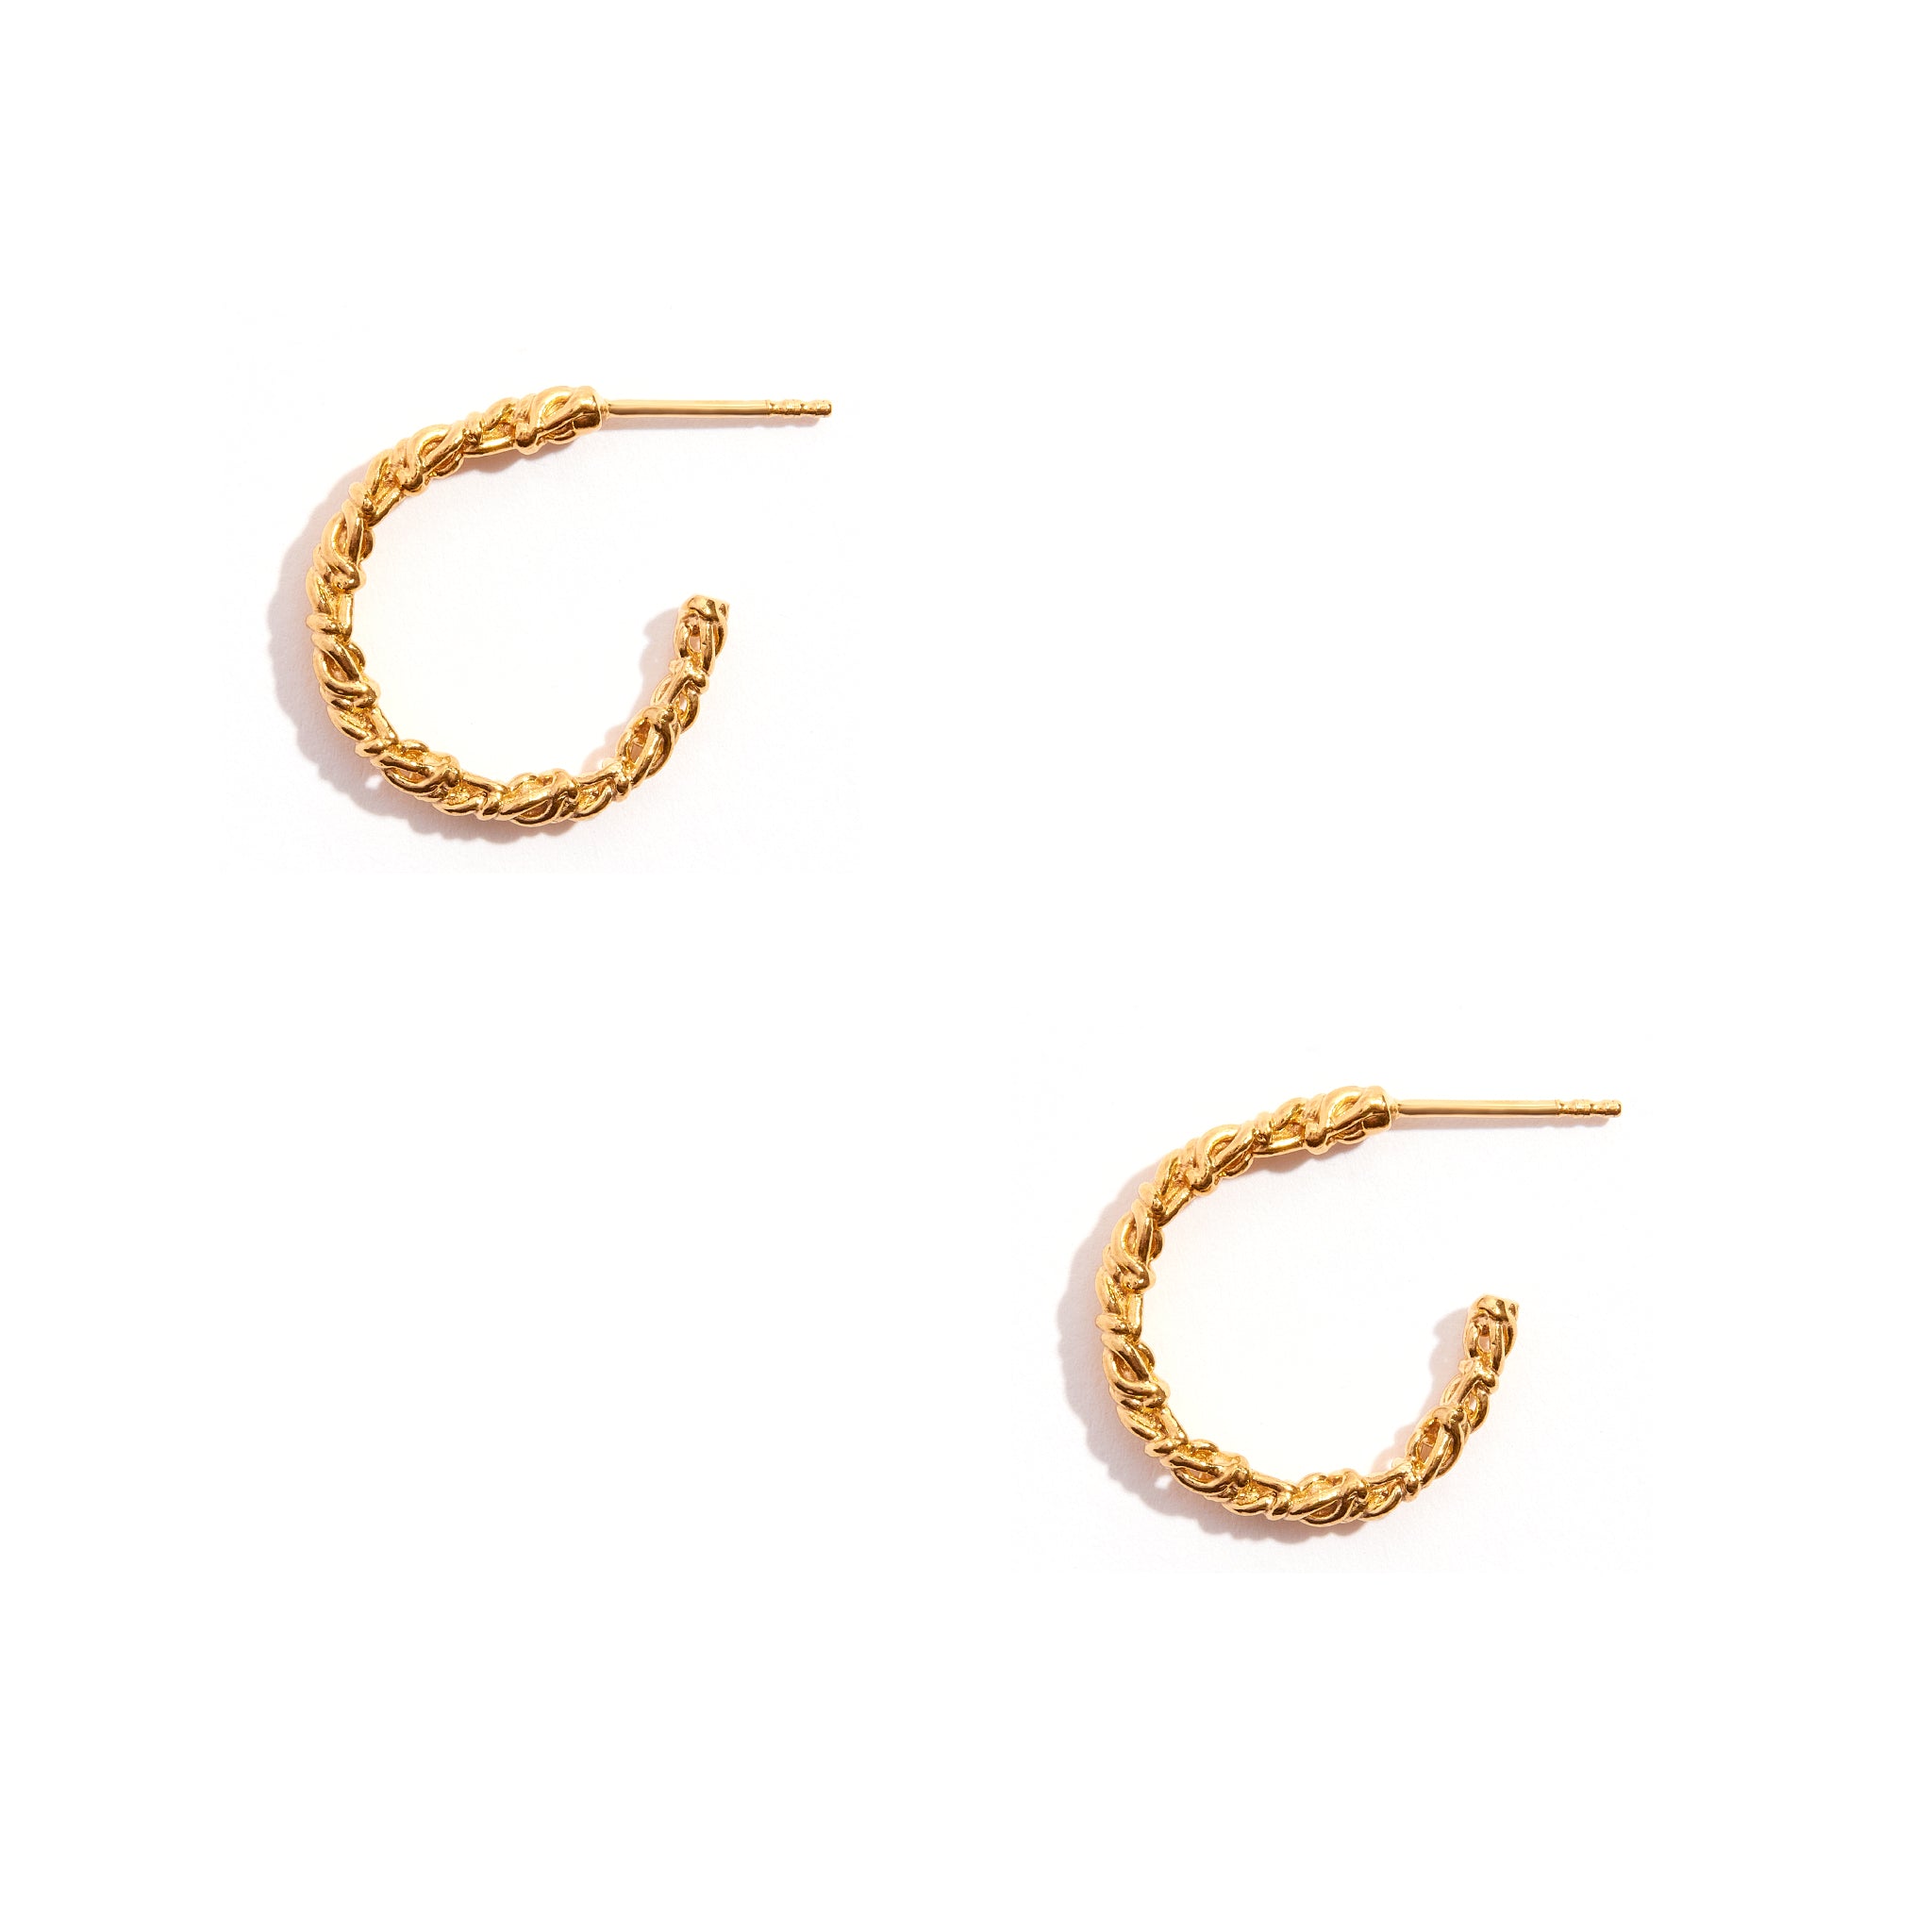 These earrings feature an open hoop design with a delicate chain dangling elegantly. Crafted from 14ct Gold Filled material, the earrings exude a luxurious charm, adding a touch of sophistication to any ensemble with their contemporary style.